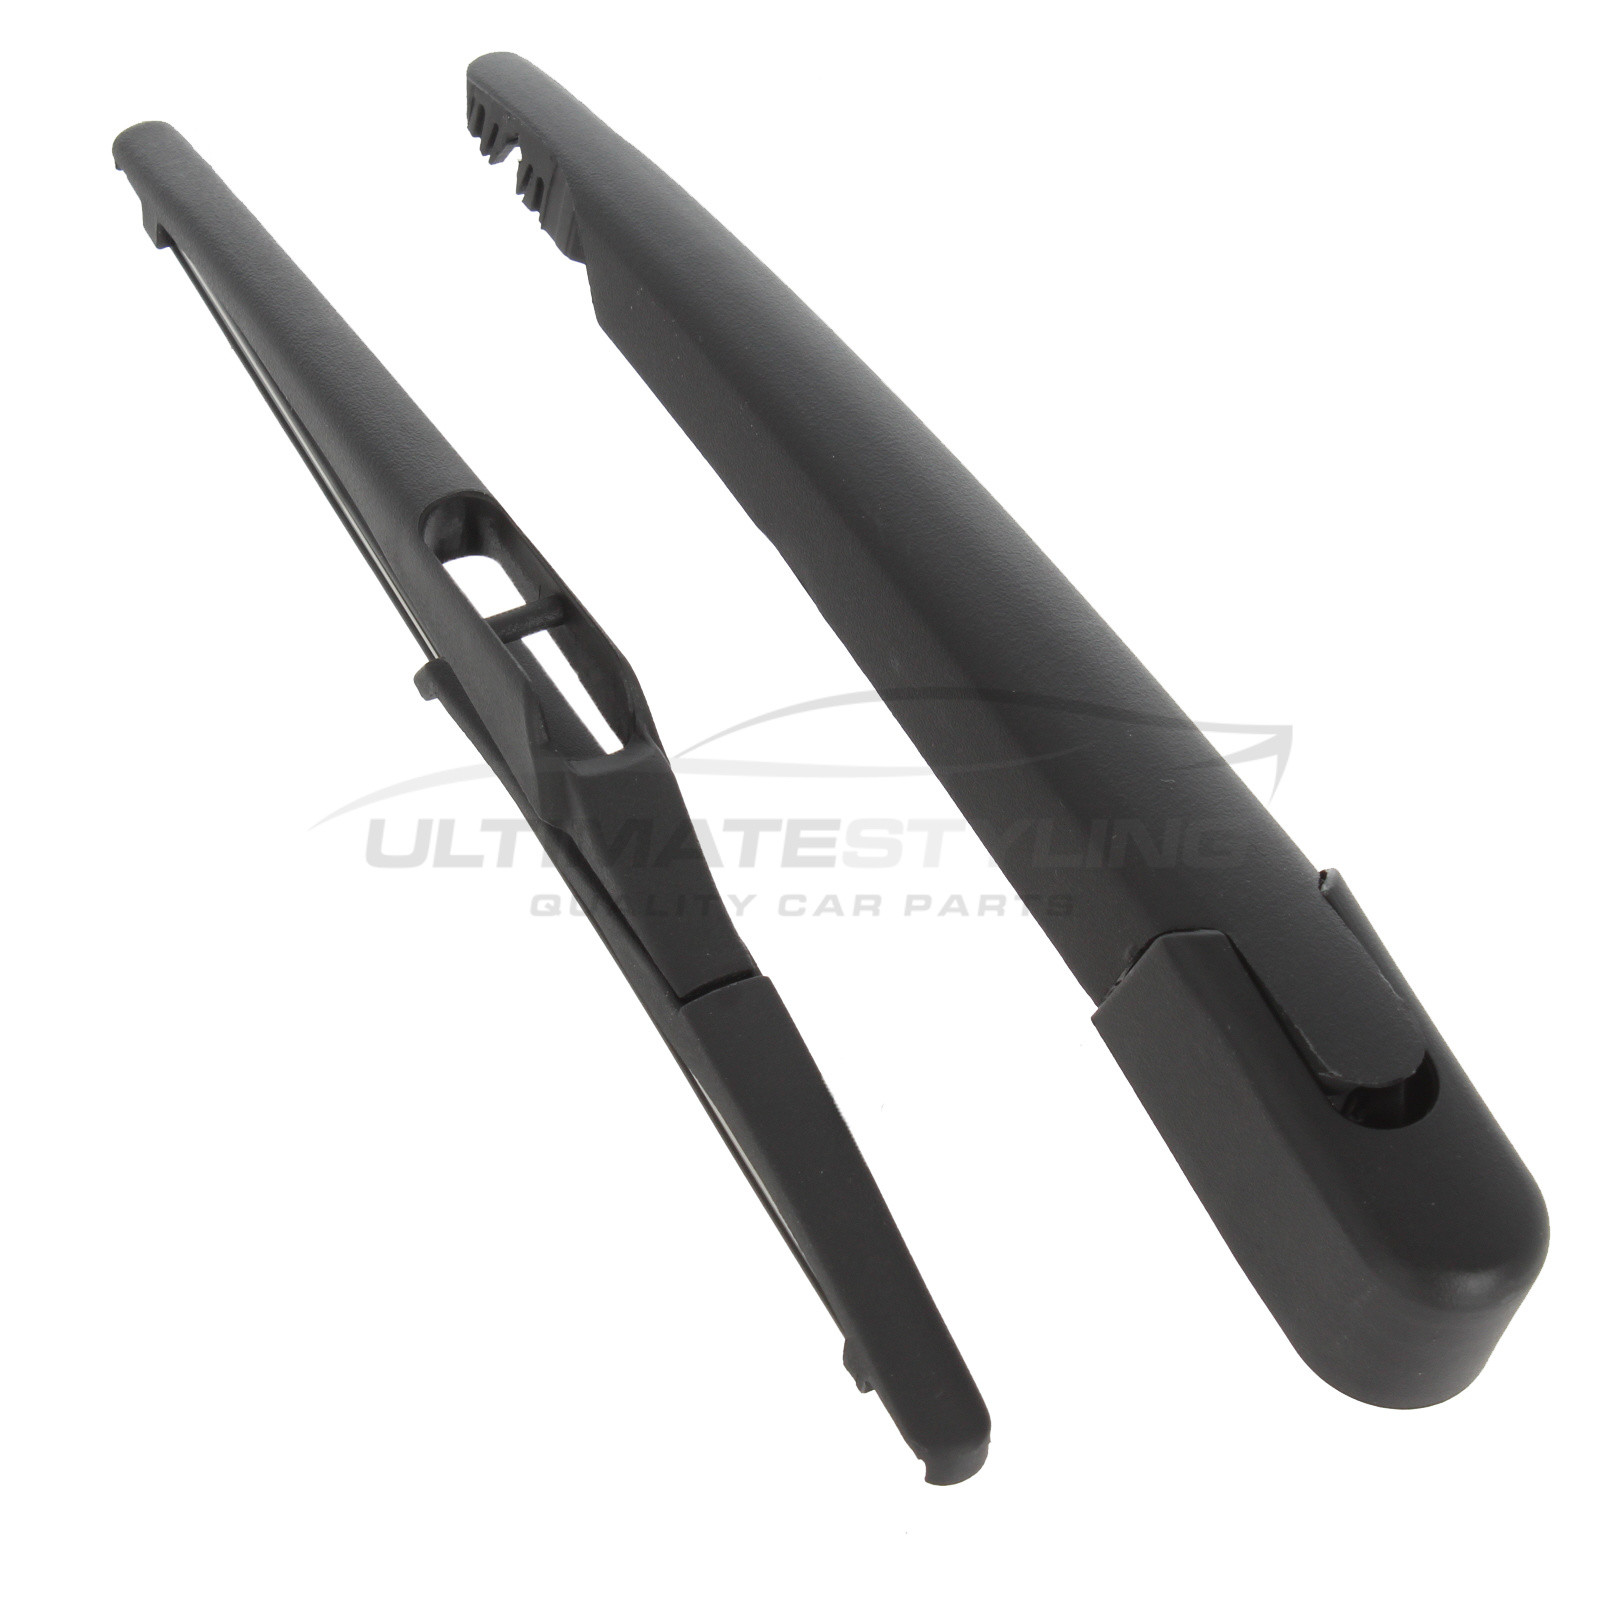 Rear Wiper Arm & Blade Set for Nissan Micra